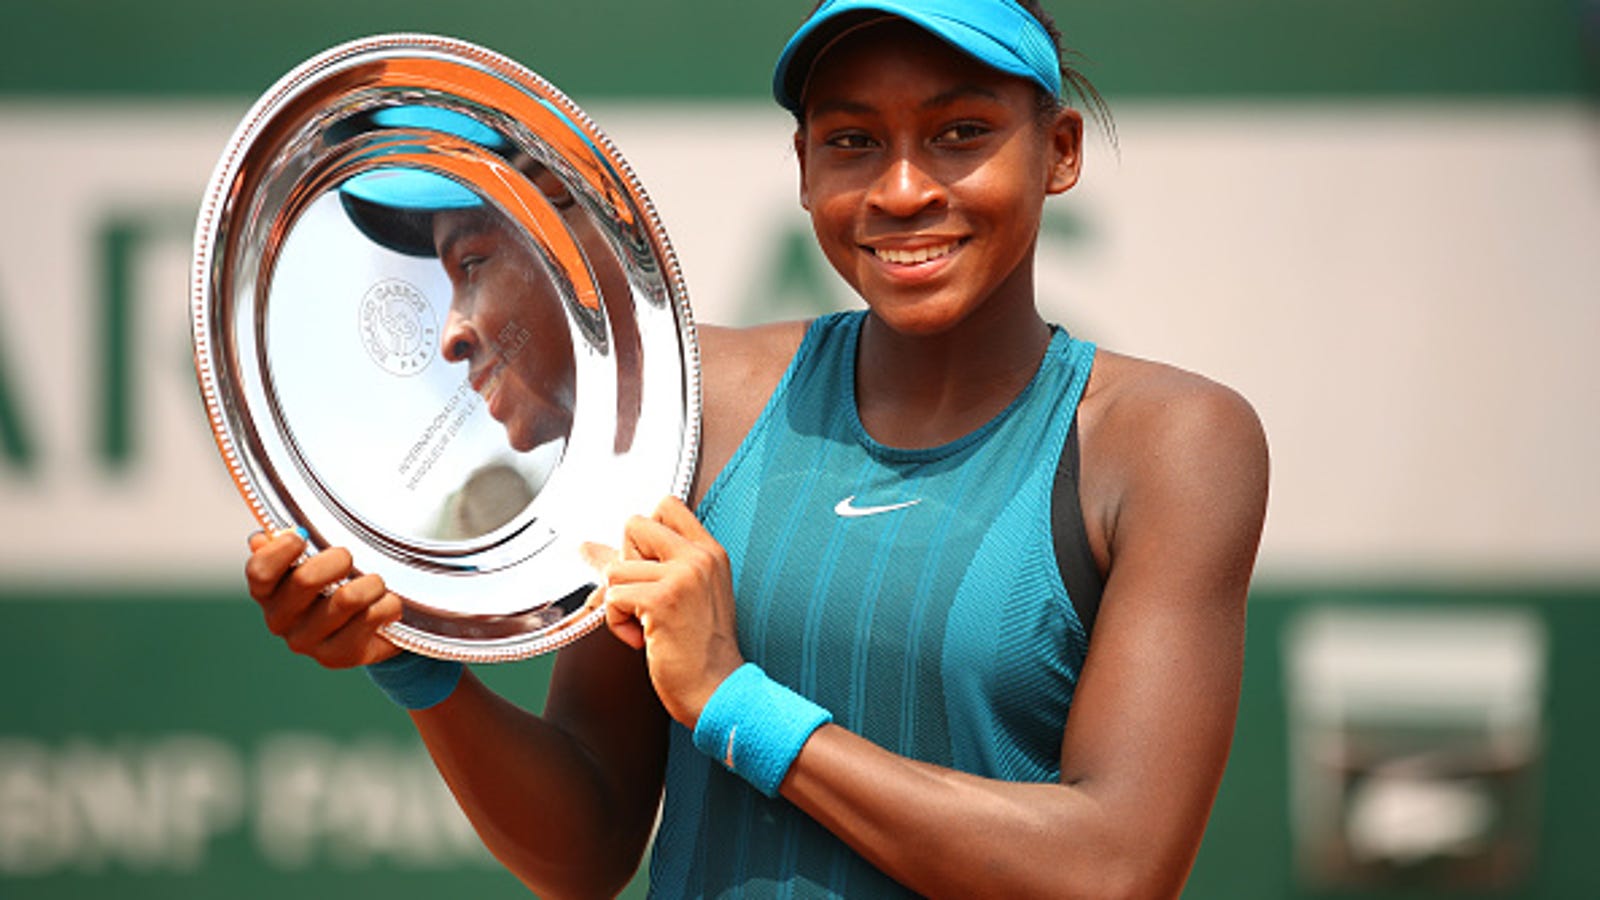 Cori 'Coco' Gauff, a 15-year-old Florida native, is the youngest player to  qualify for Wimbledon